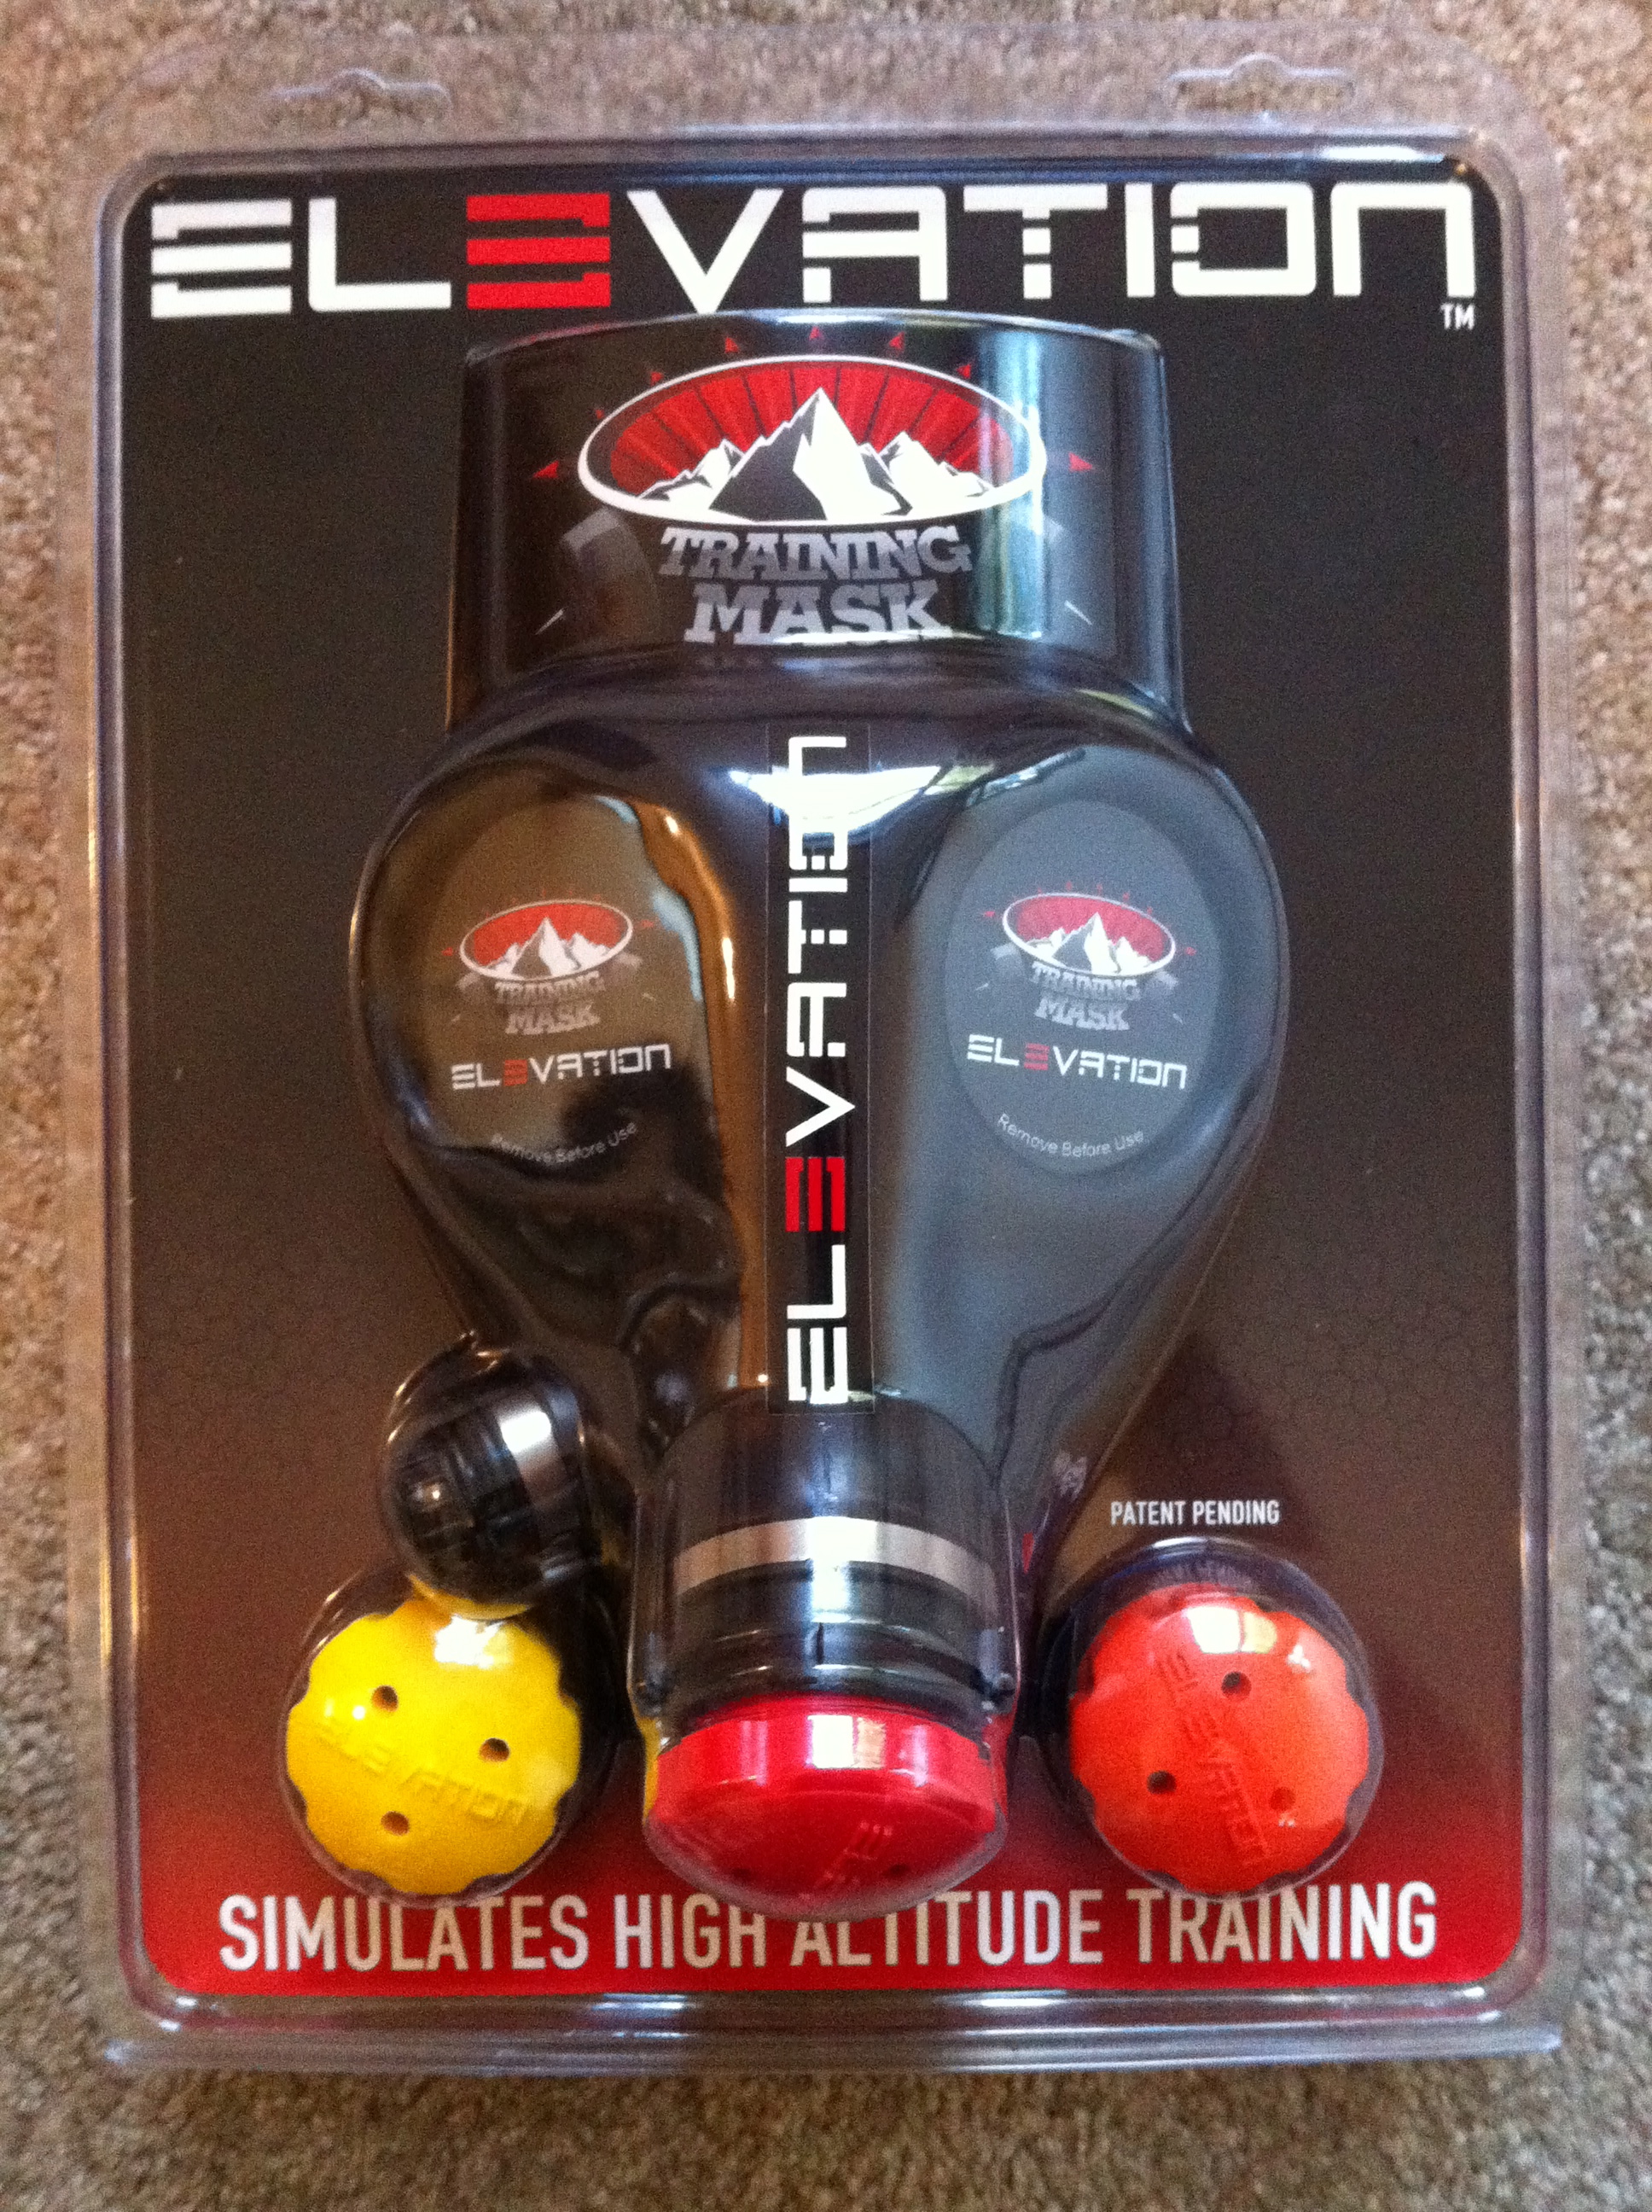 Review: Elevation Training Mask - First Impressions